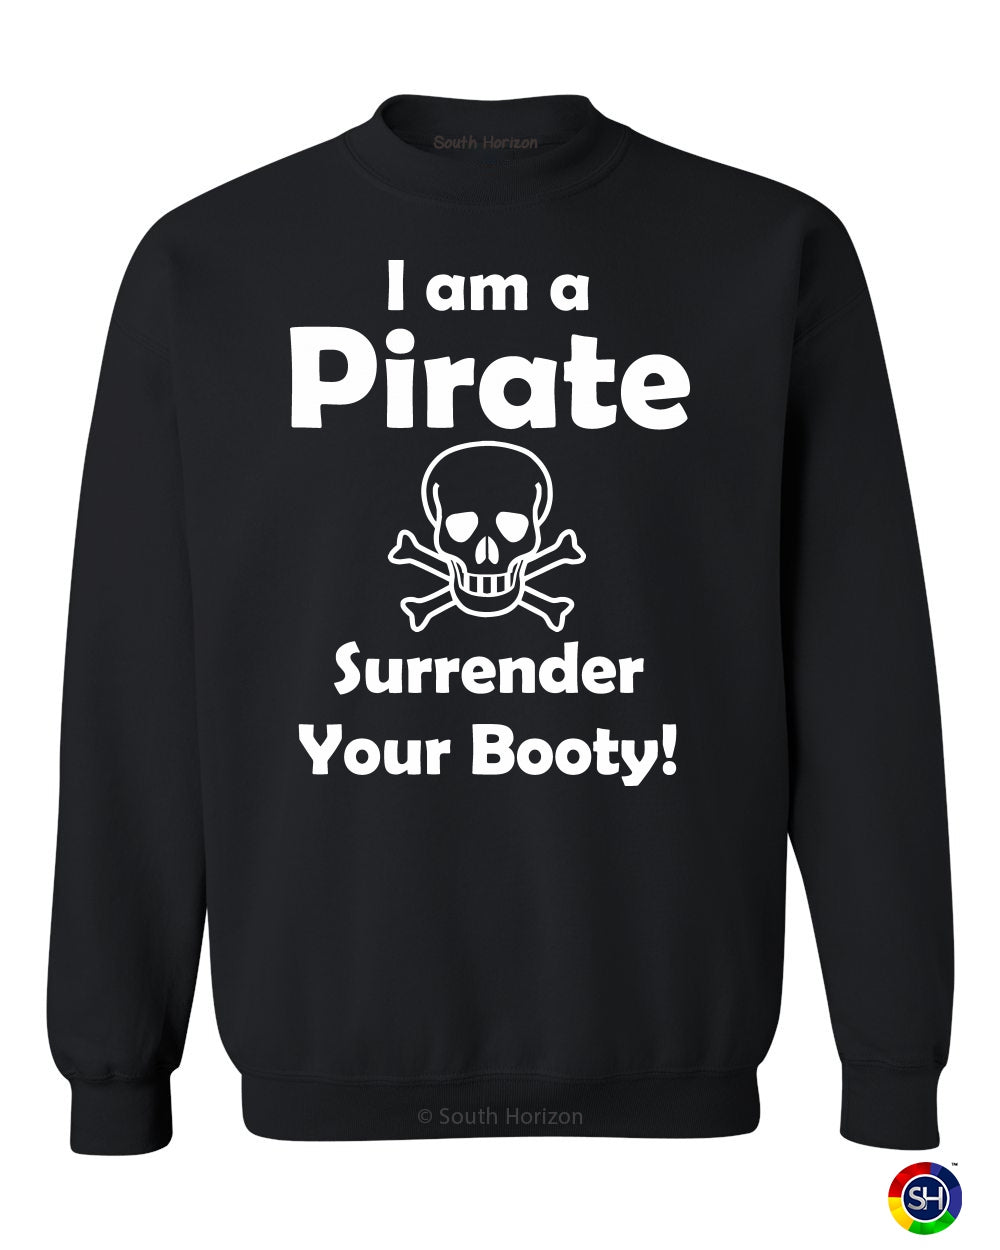 I am a Pirate, Surrender Your Booty on SweatShirt (#807-11)